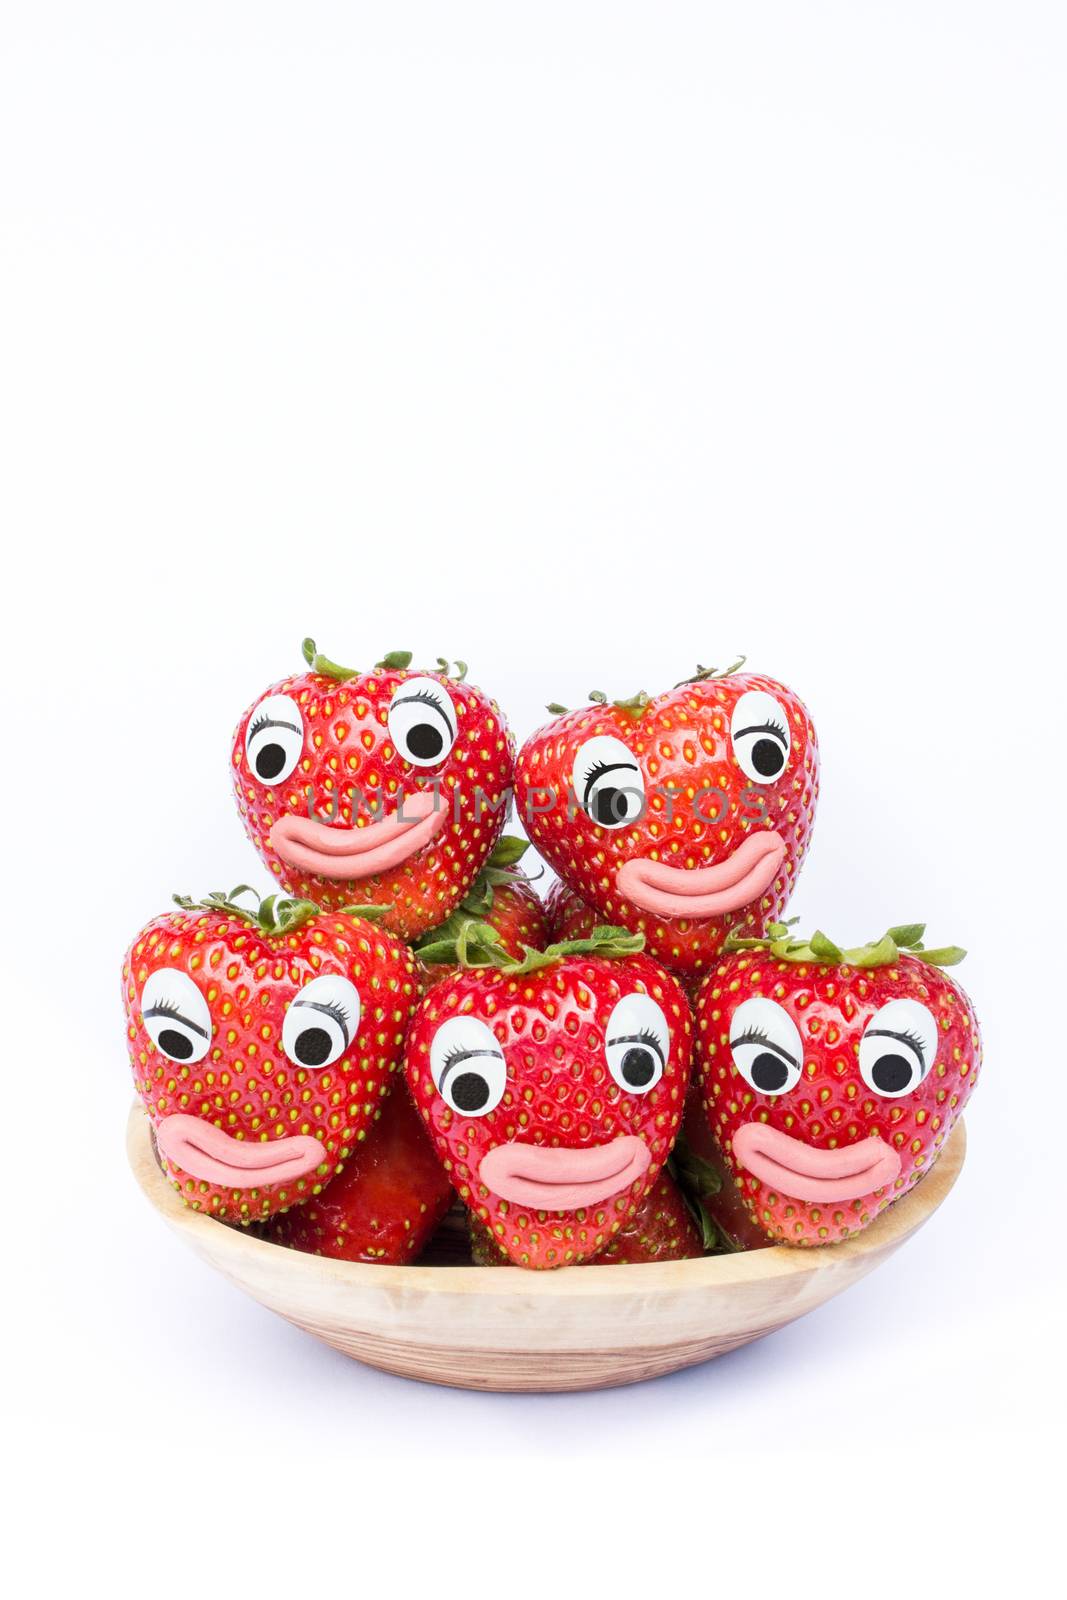 Pile of strawberries with eyes and mouths by BenSchonewille